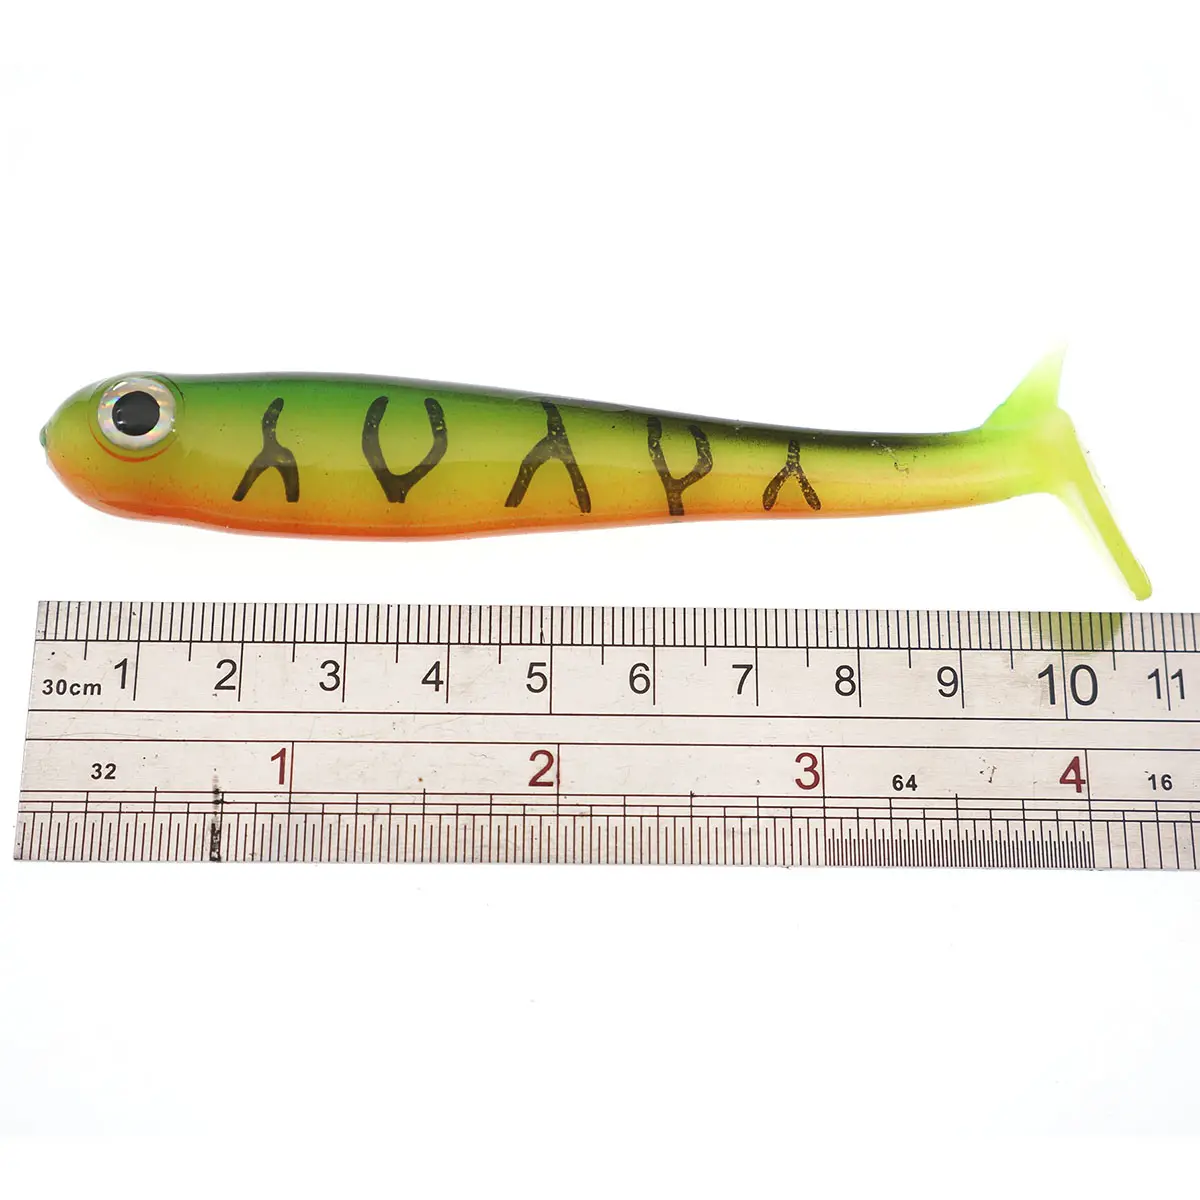 FJD 4" 10G TPR Soft worm Lure Trout Lure artifical pesca bait Minnow Hollow Belly Paddle Tail Swimbait